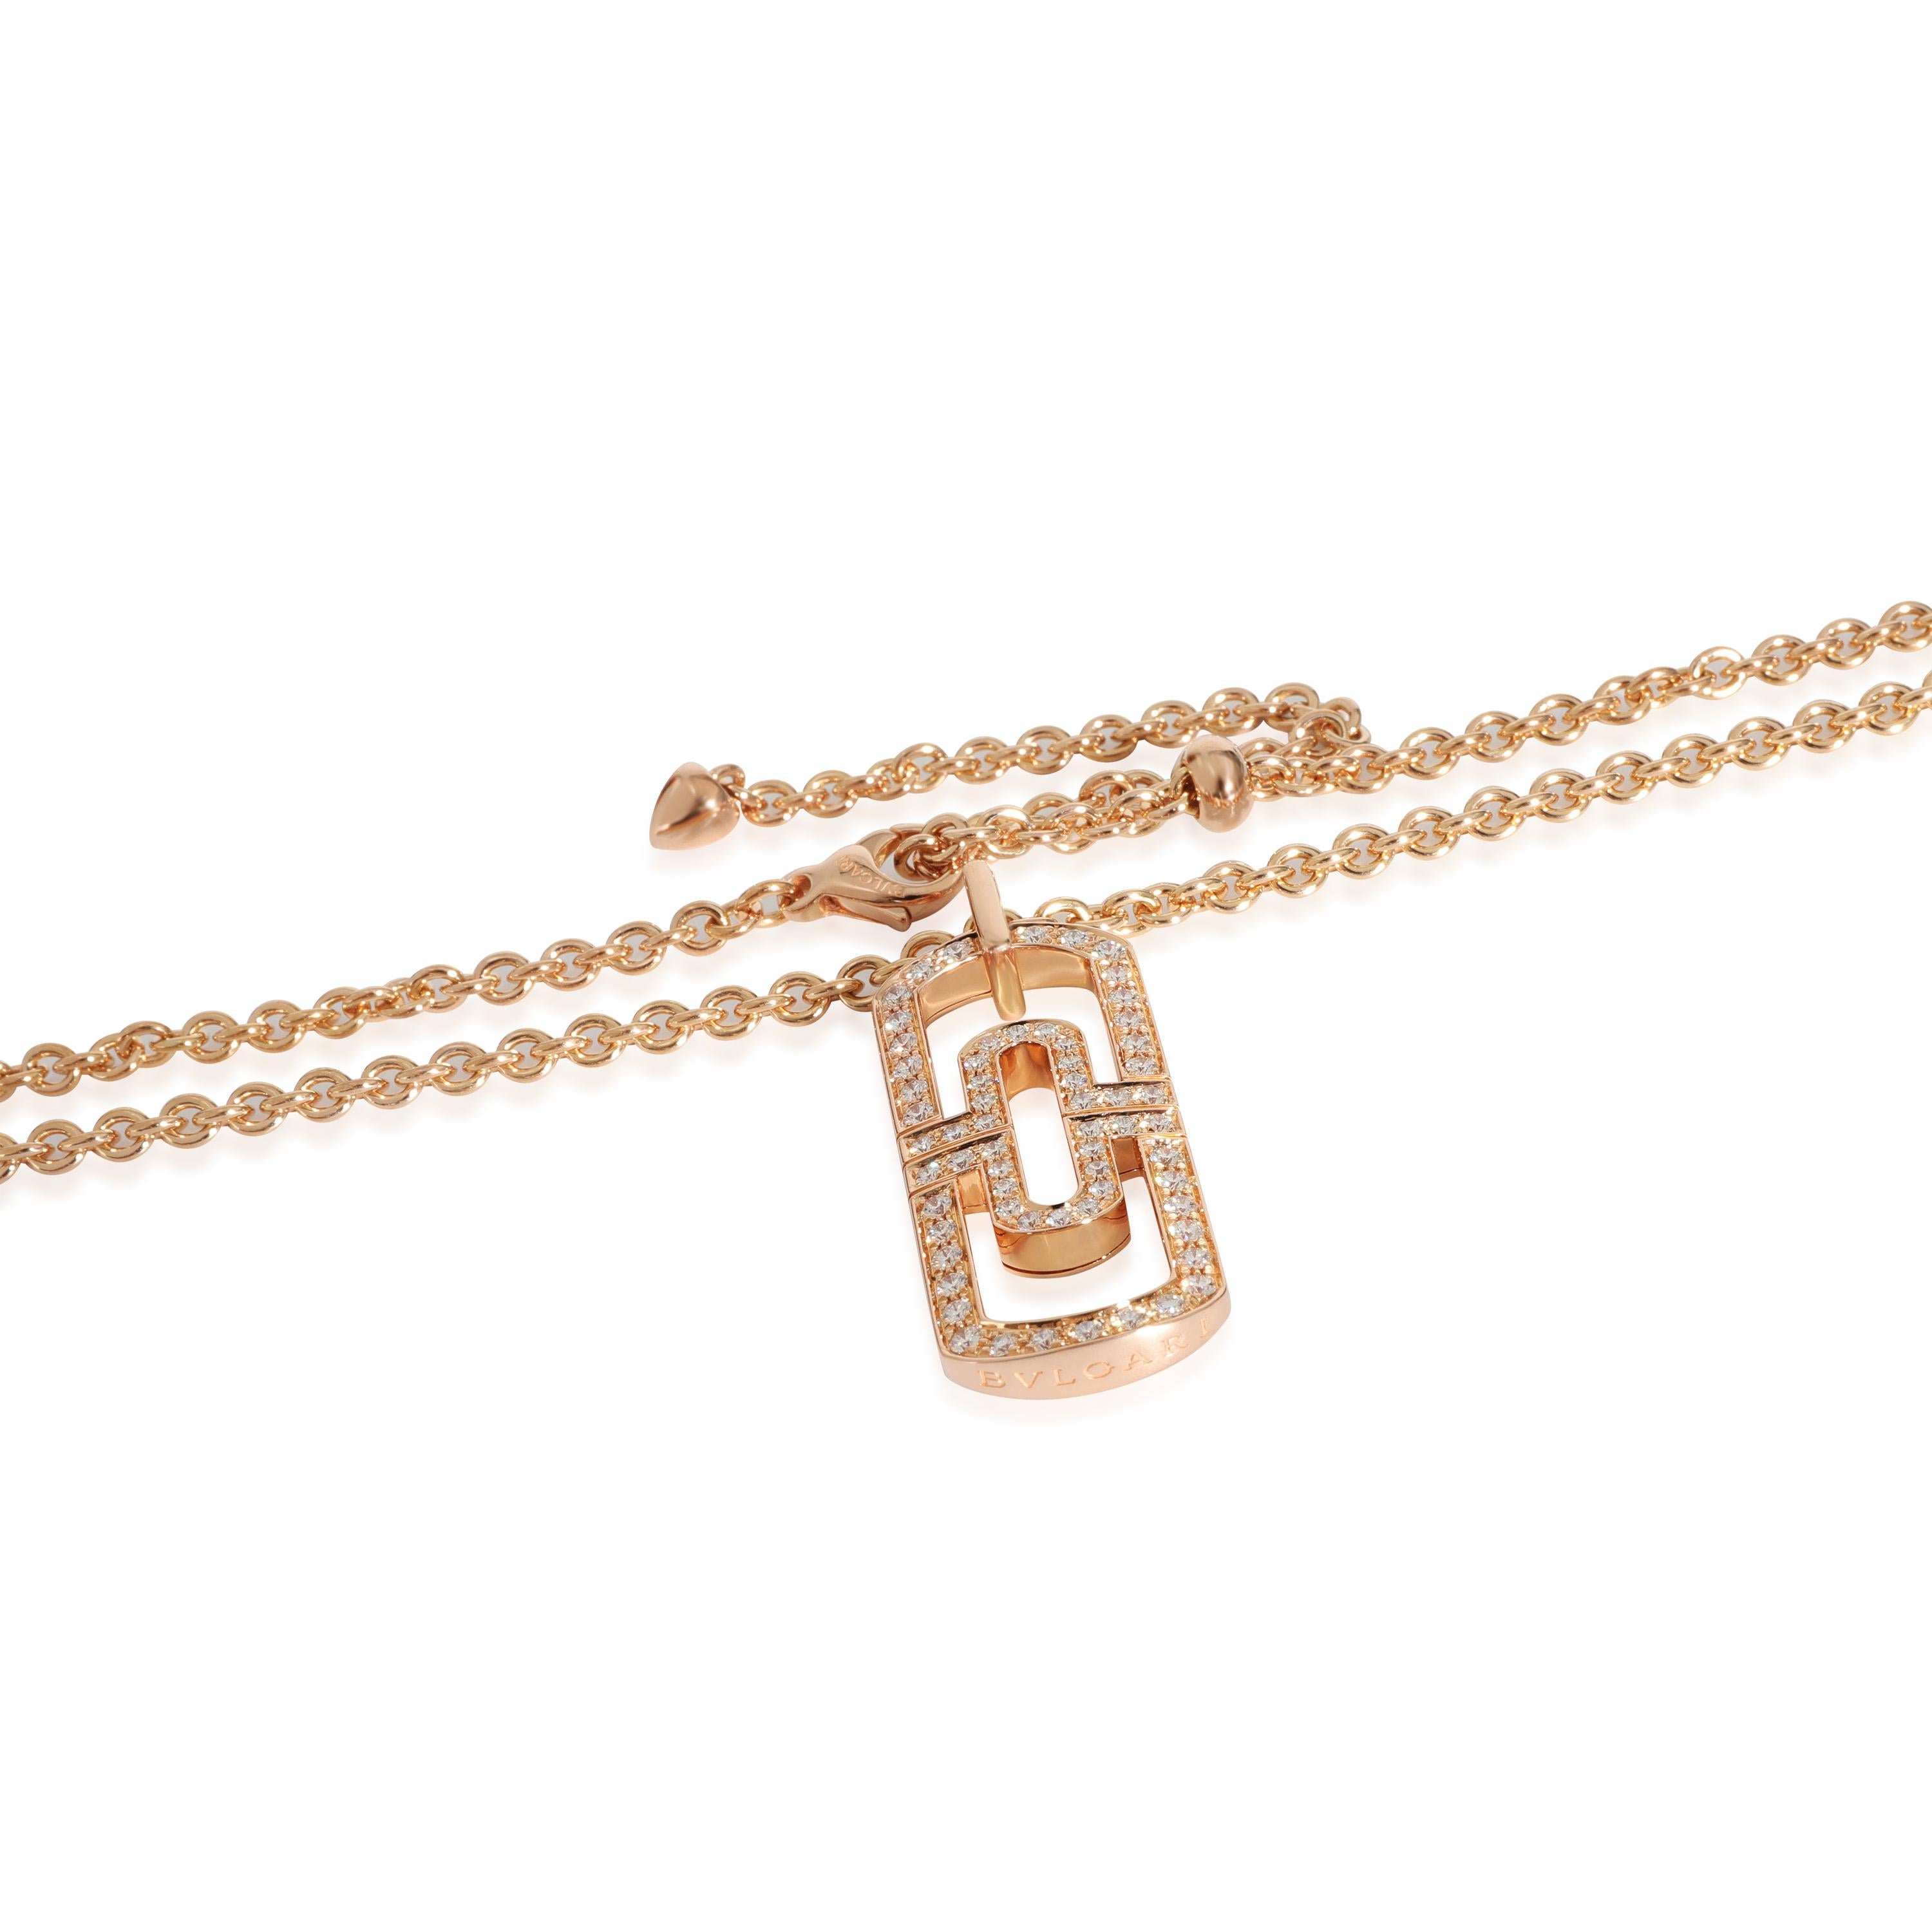 BVLGARI Parentesi Fashion Pendant in 18k Rose Gold 1.18 CTW

PRIMARY DETAILS
SKU: 131572
Listing Title: BVLGARI Parentesi Fashion Pendant in 18k Rose Gold 1.18 CTW
Condition Description: Recently polished and in excellent condition. Comes with the